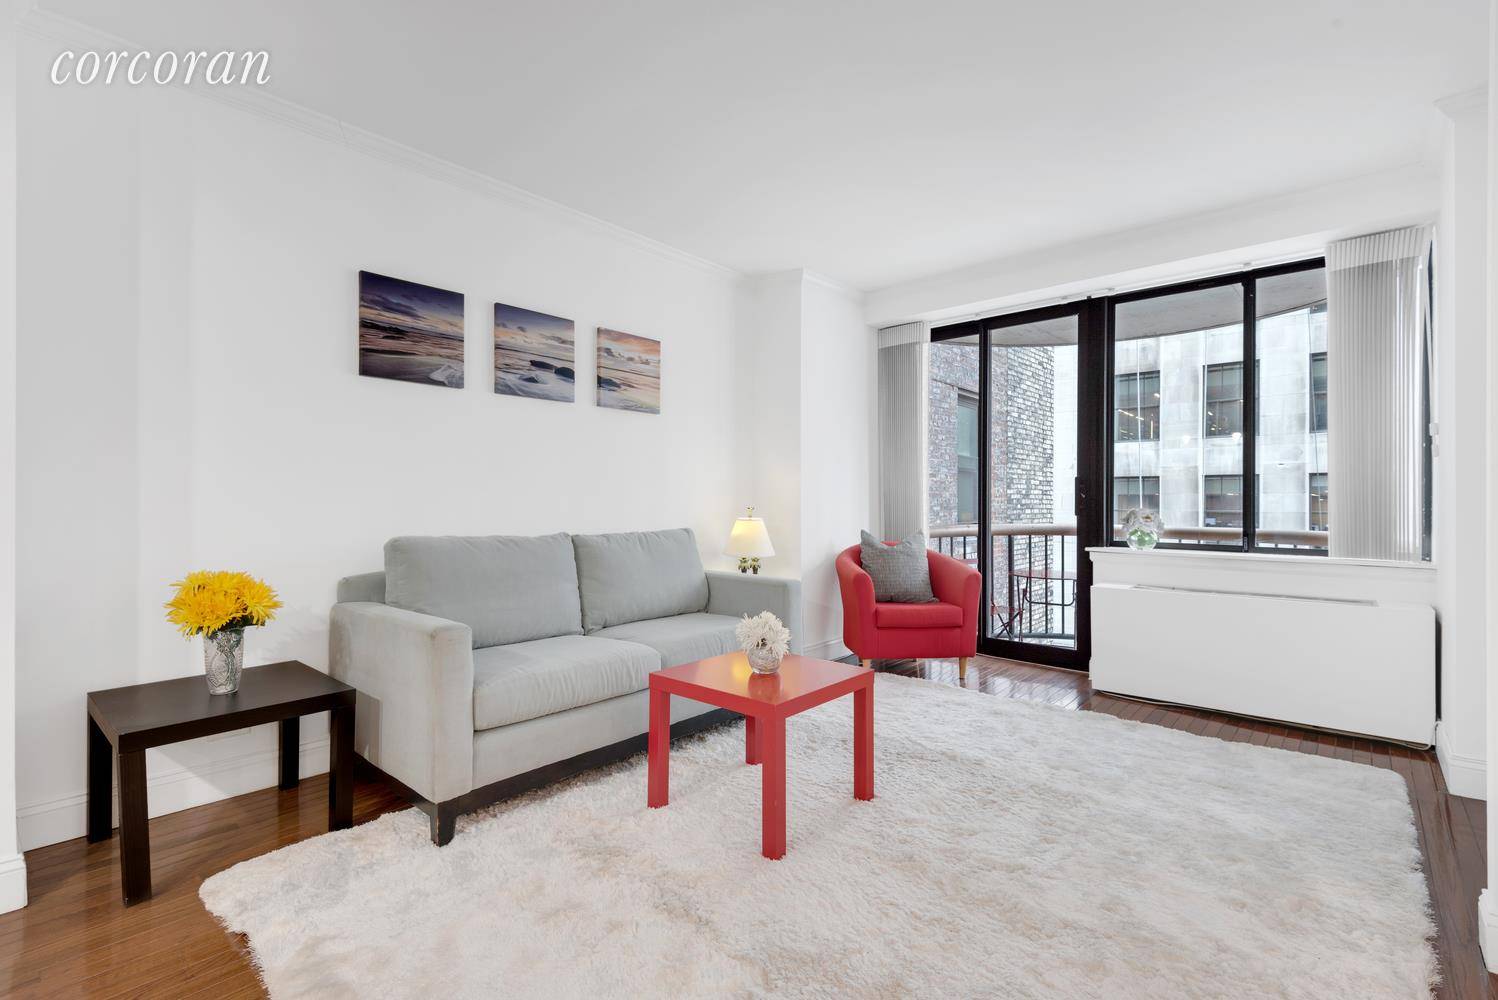 This beautifully renovated 1 bedroom home at 45 East 25th Street is in the heart of the Flatiron neighborhood.